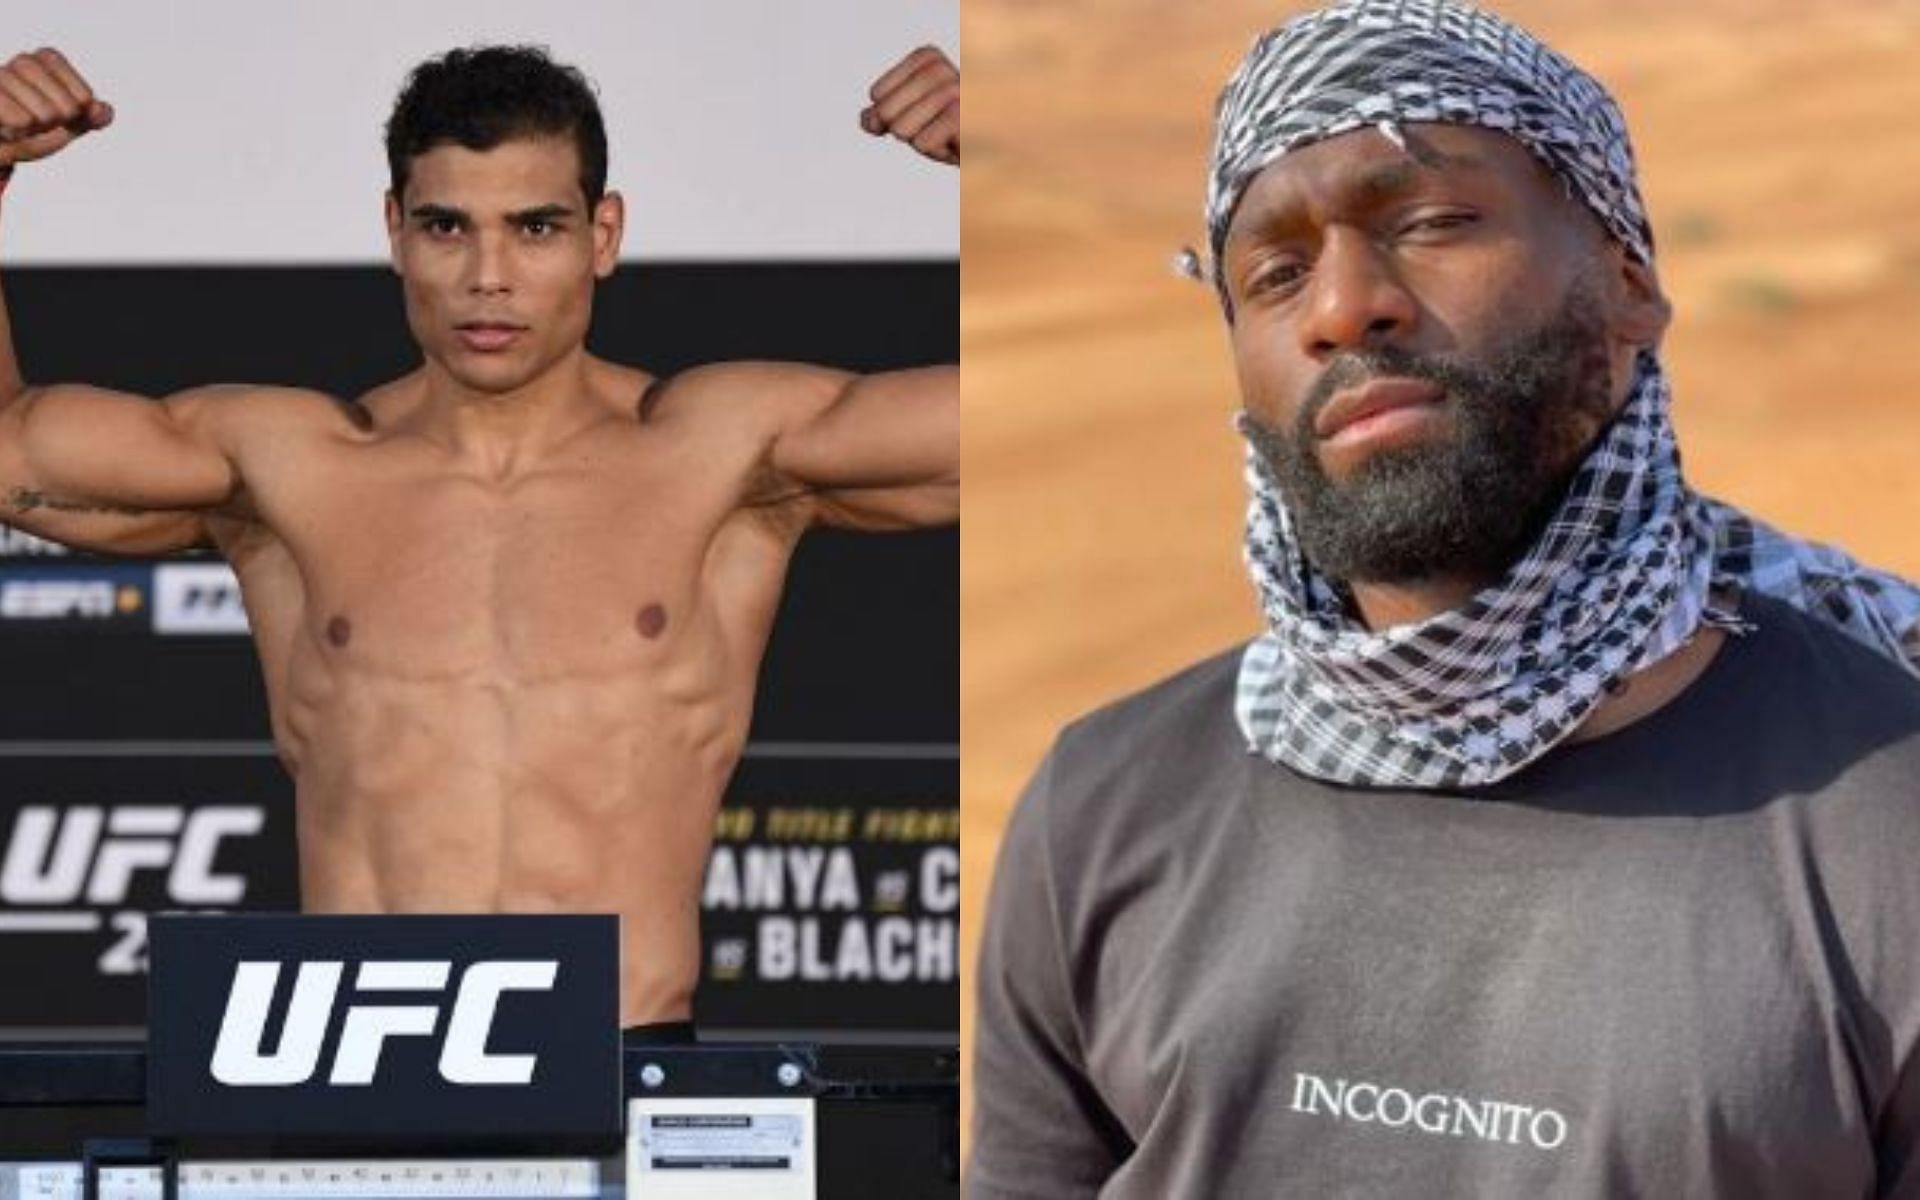 Paulo Costa (left) and Cedric Doumbe (right) [Image credits: Getty and Instagram @cedricdoumbe]